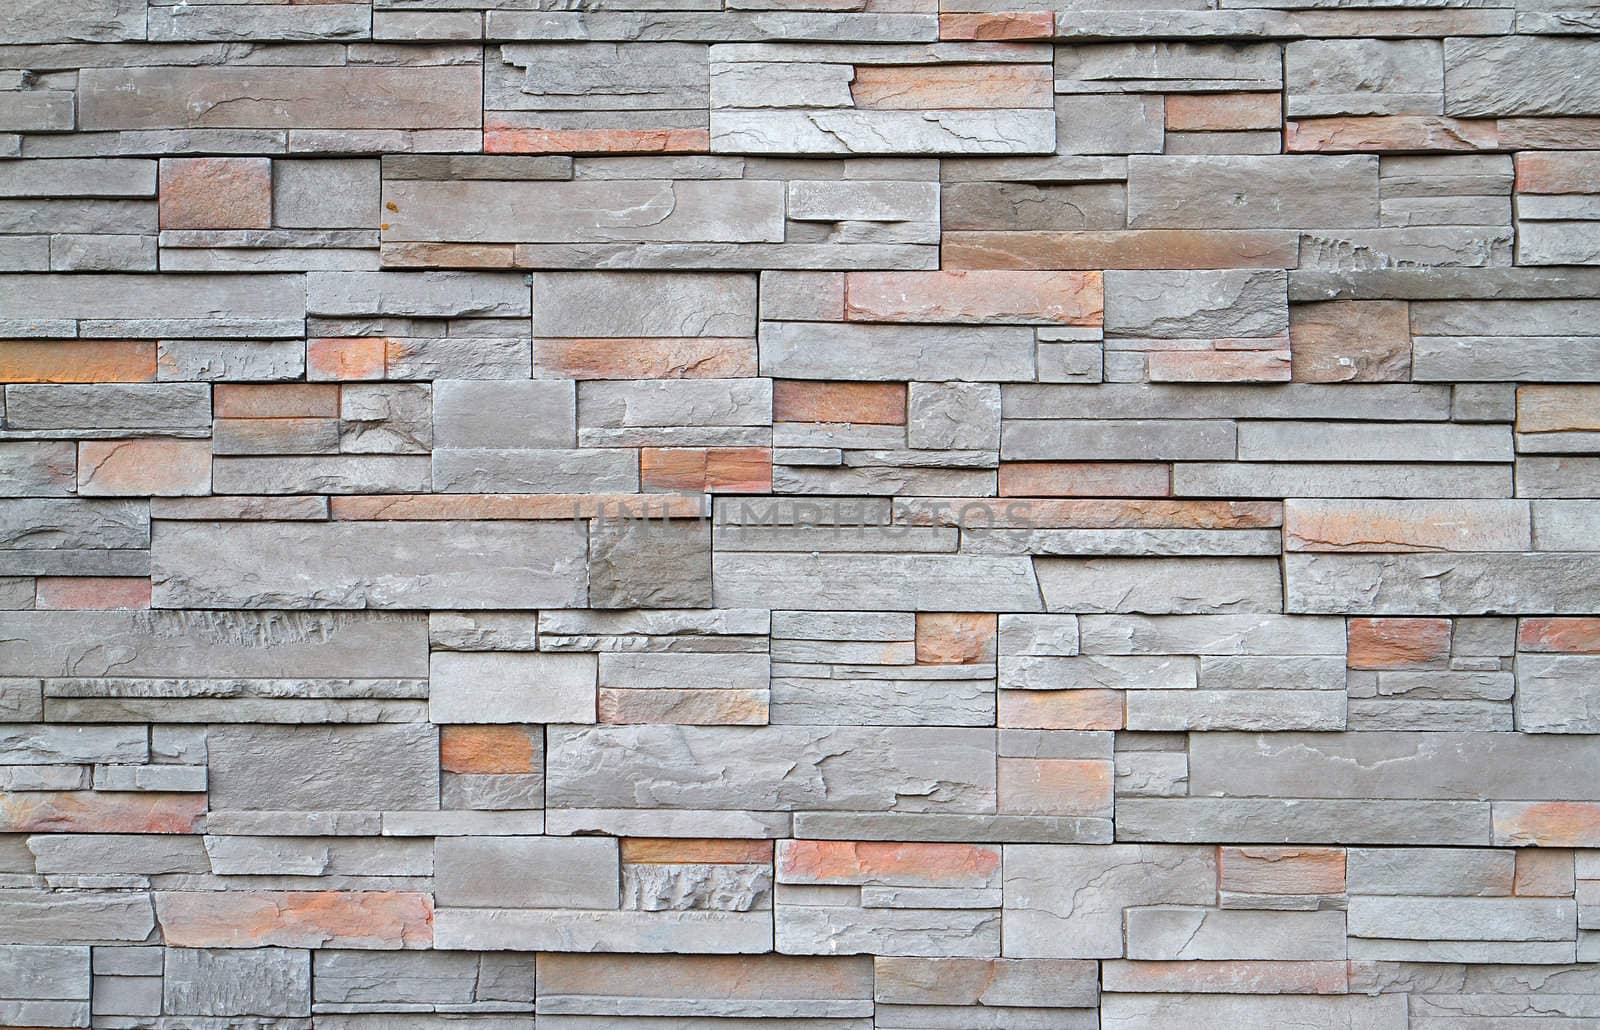 Gray, brown, red flat stone wall in a random pattern